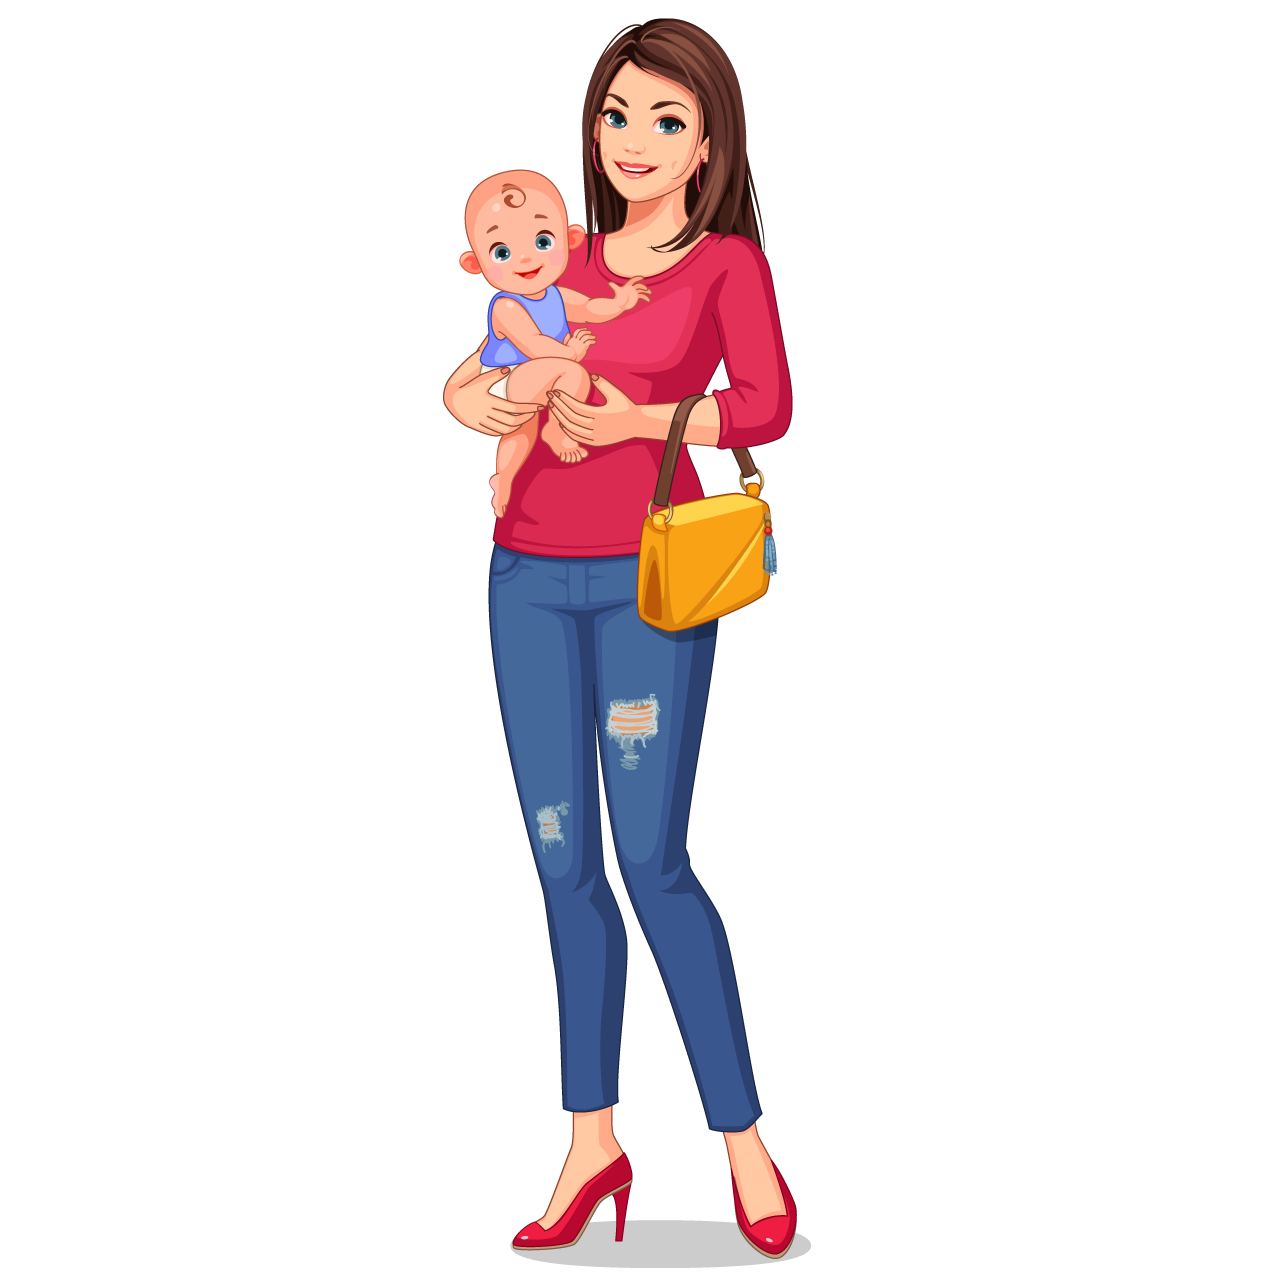 Beautiful young female with her baby illustration clipart image transparent background